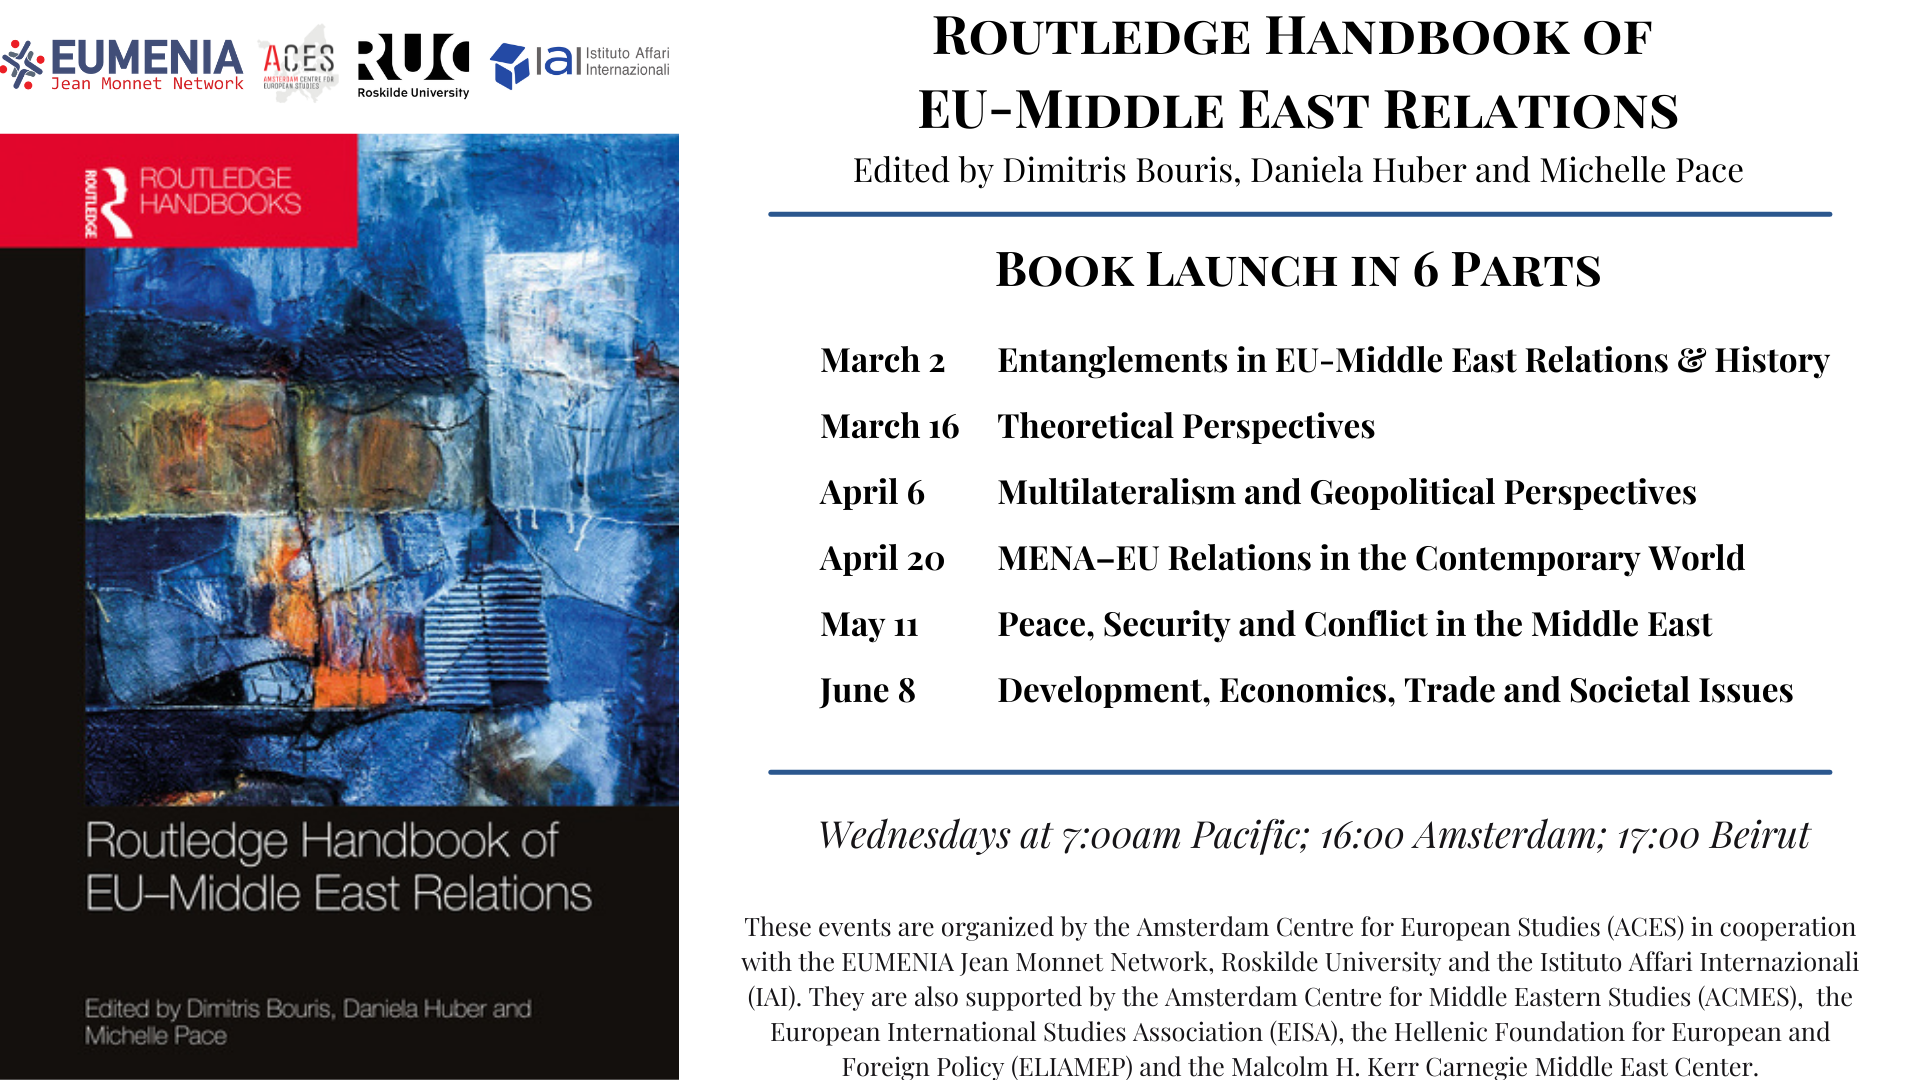 Launch Series of the Routledge Handbook of EU-Middle East Relations